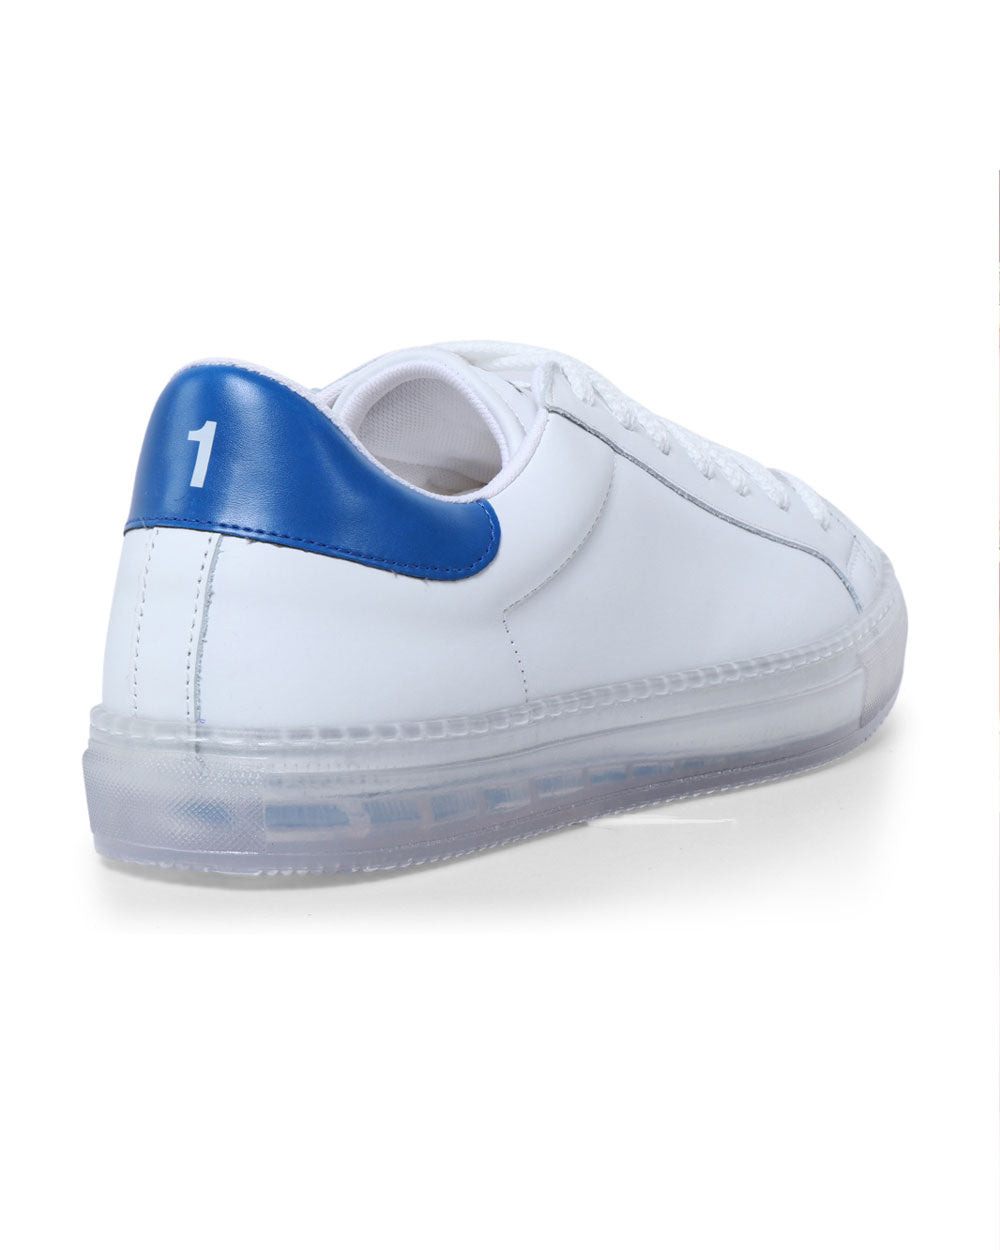 Leather Sneaker with Clear Sole in Electric Blue